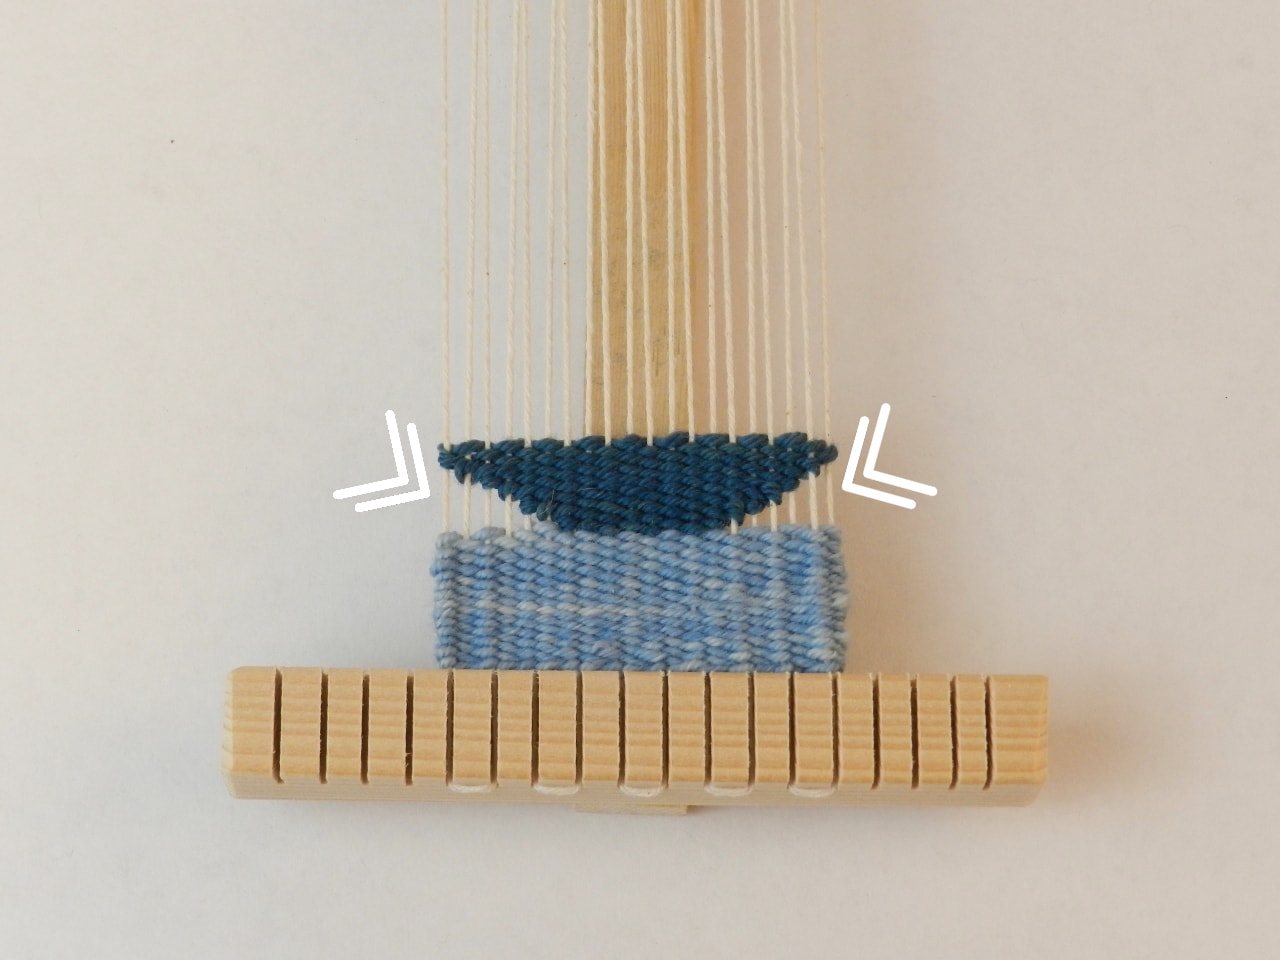 image description: a narrow warp of white yarn has about an inch of light blue weaving at the bottom, with navy weaving in the shape of an inverted trapezoid on top of the light blue, with a small triangle unwoven at either side. Arrows point to the unwoven triangles.